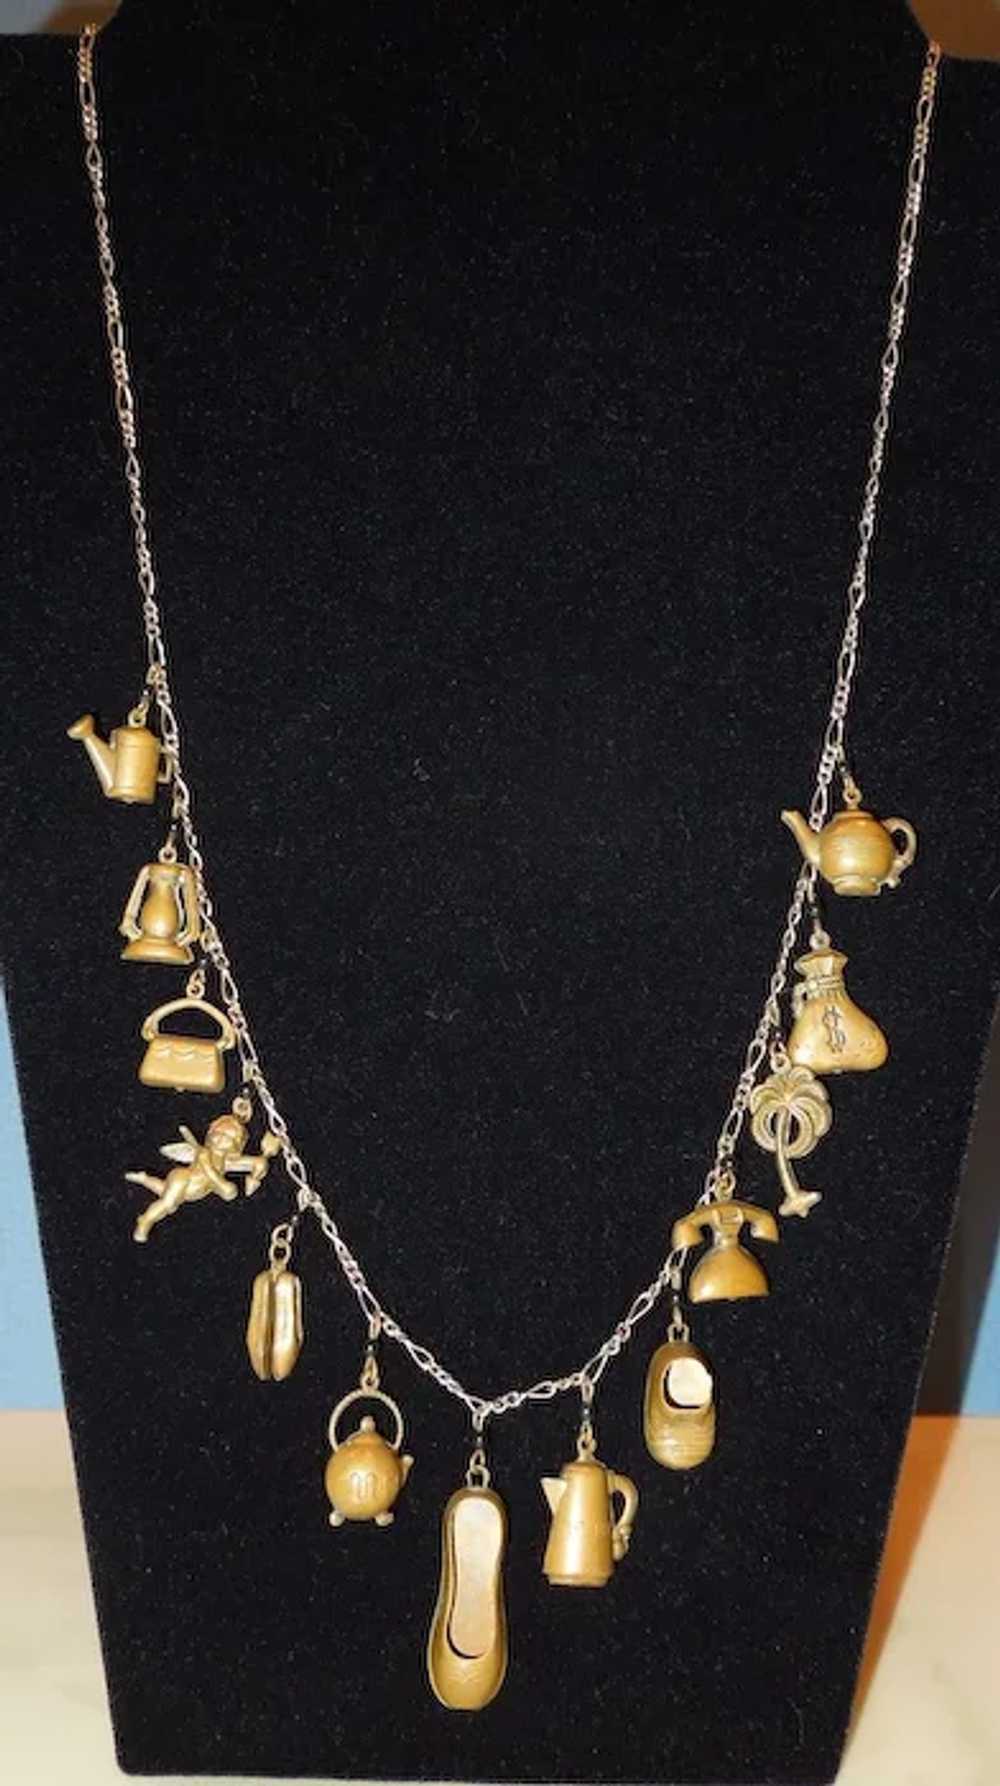 1920's-30's Brass Charm Necklace - image 3